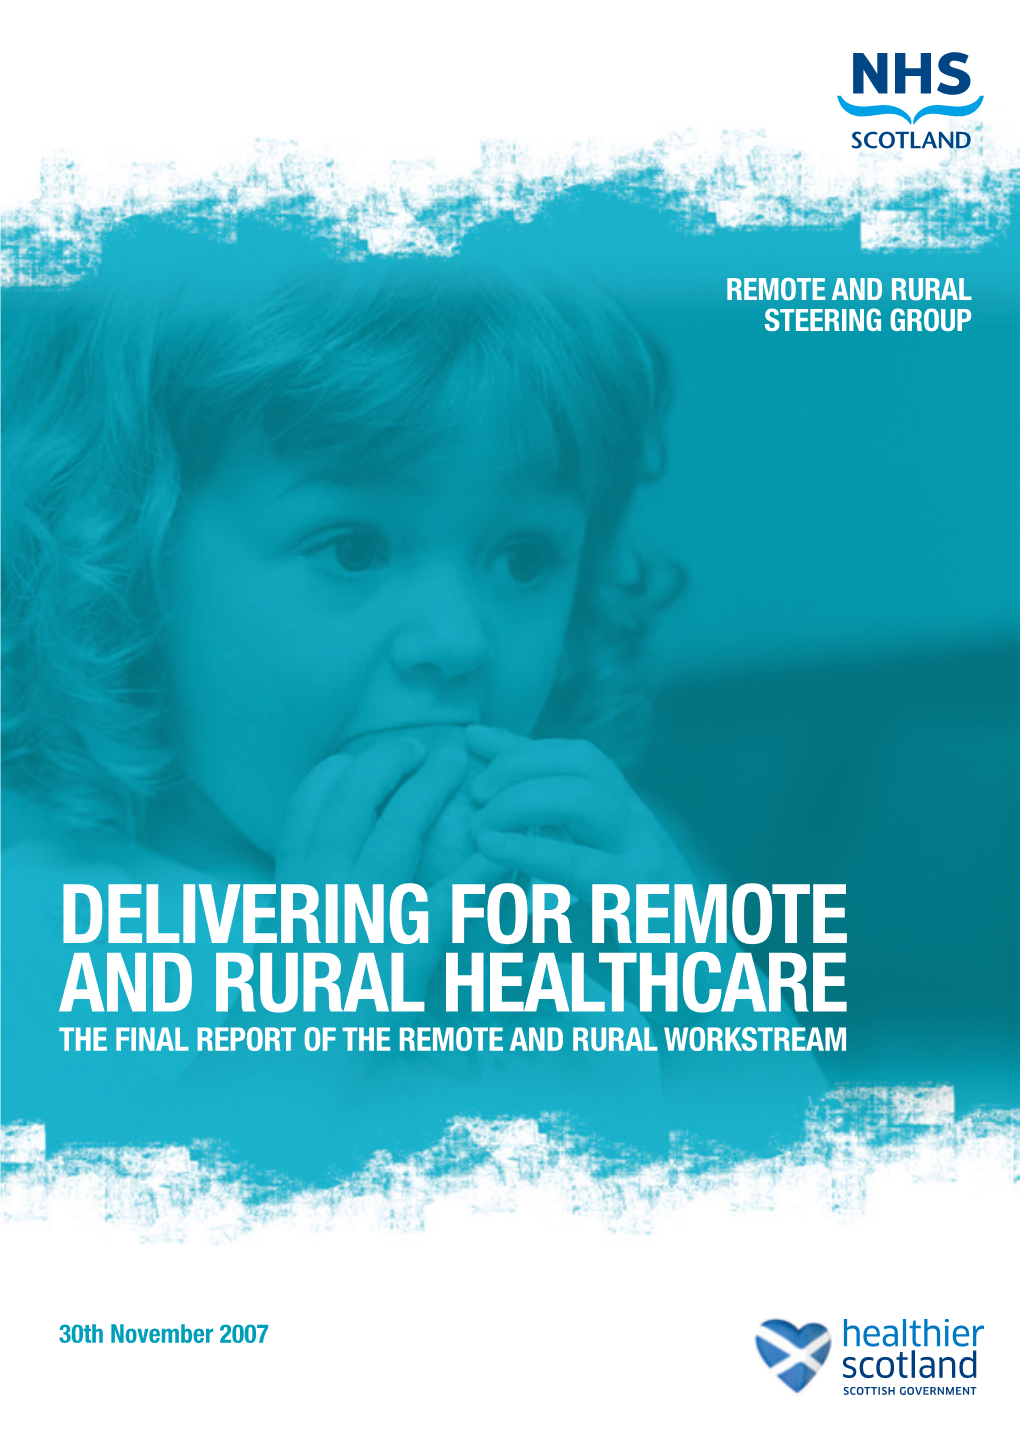 The Final Report of the Remote and Rural Workstream